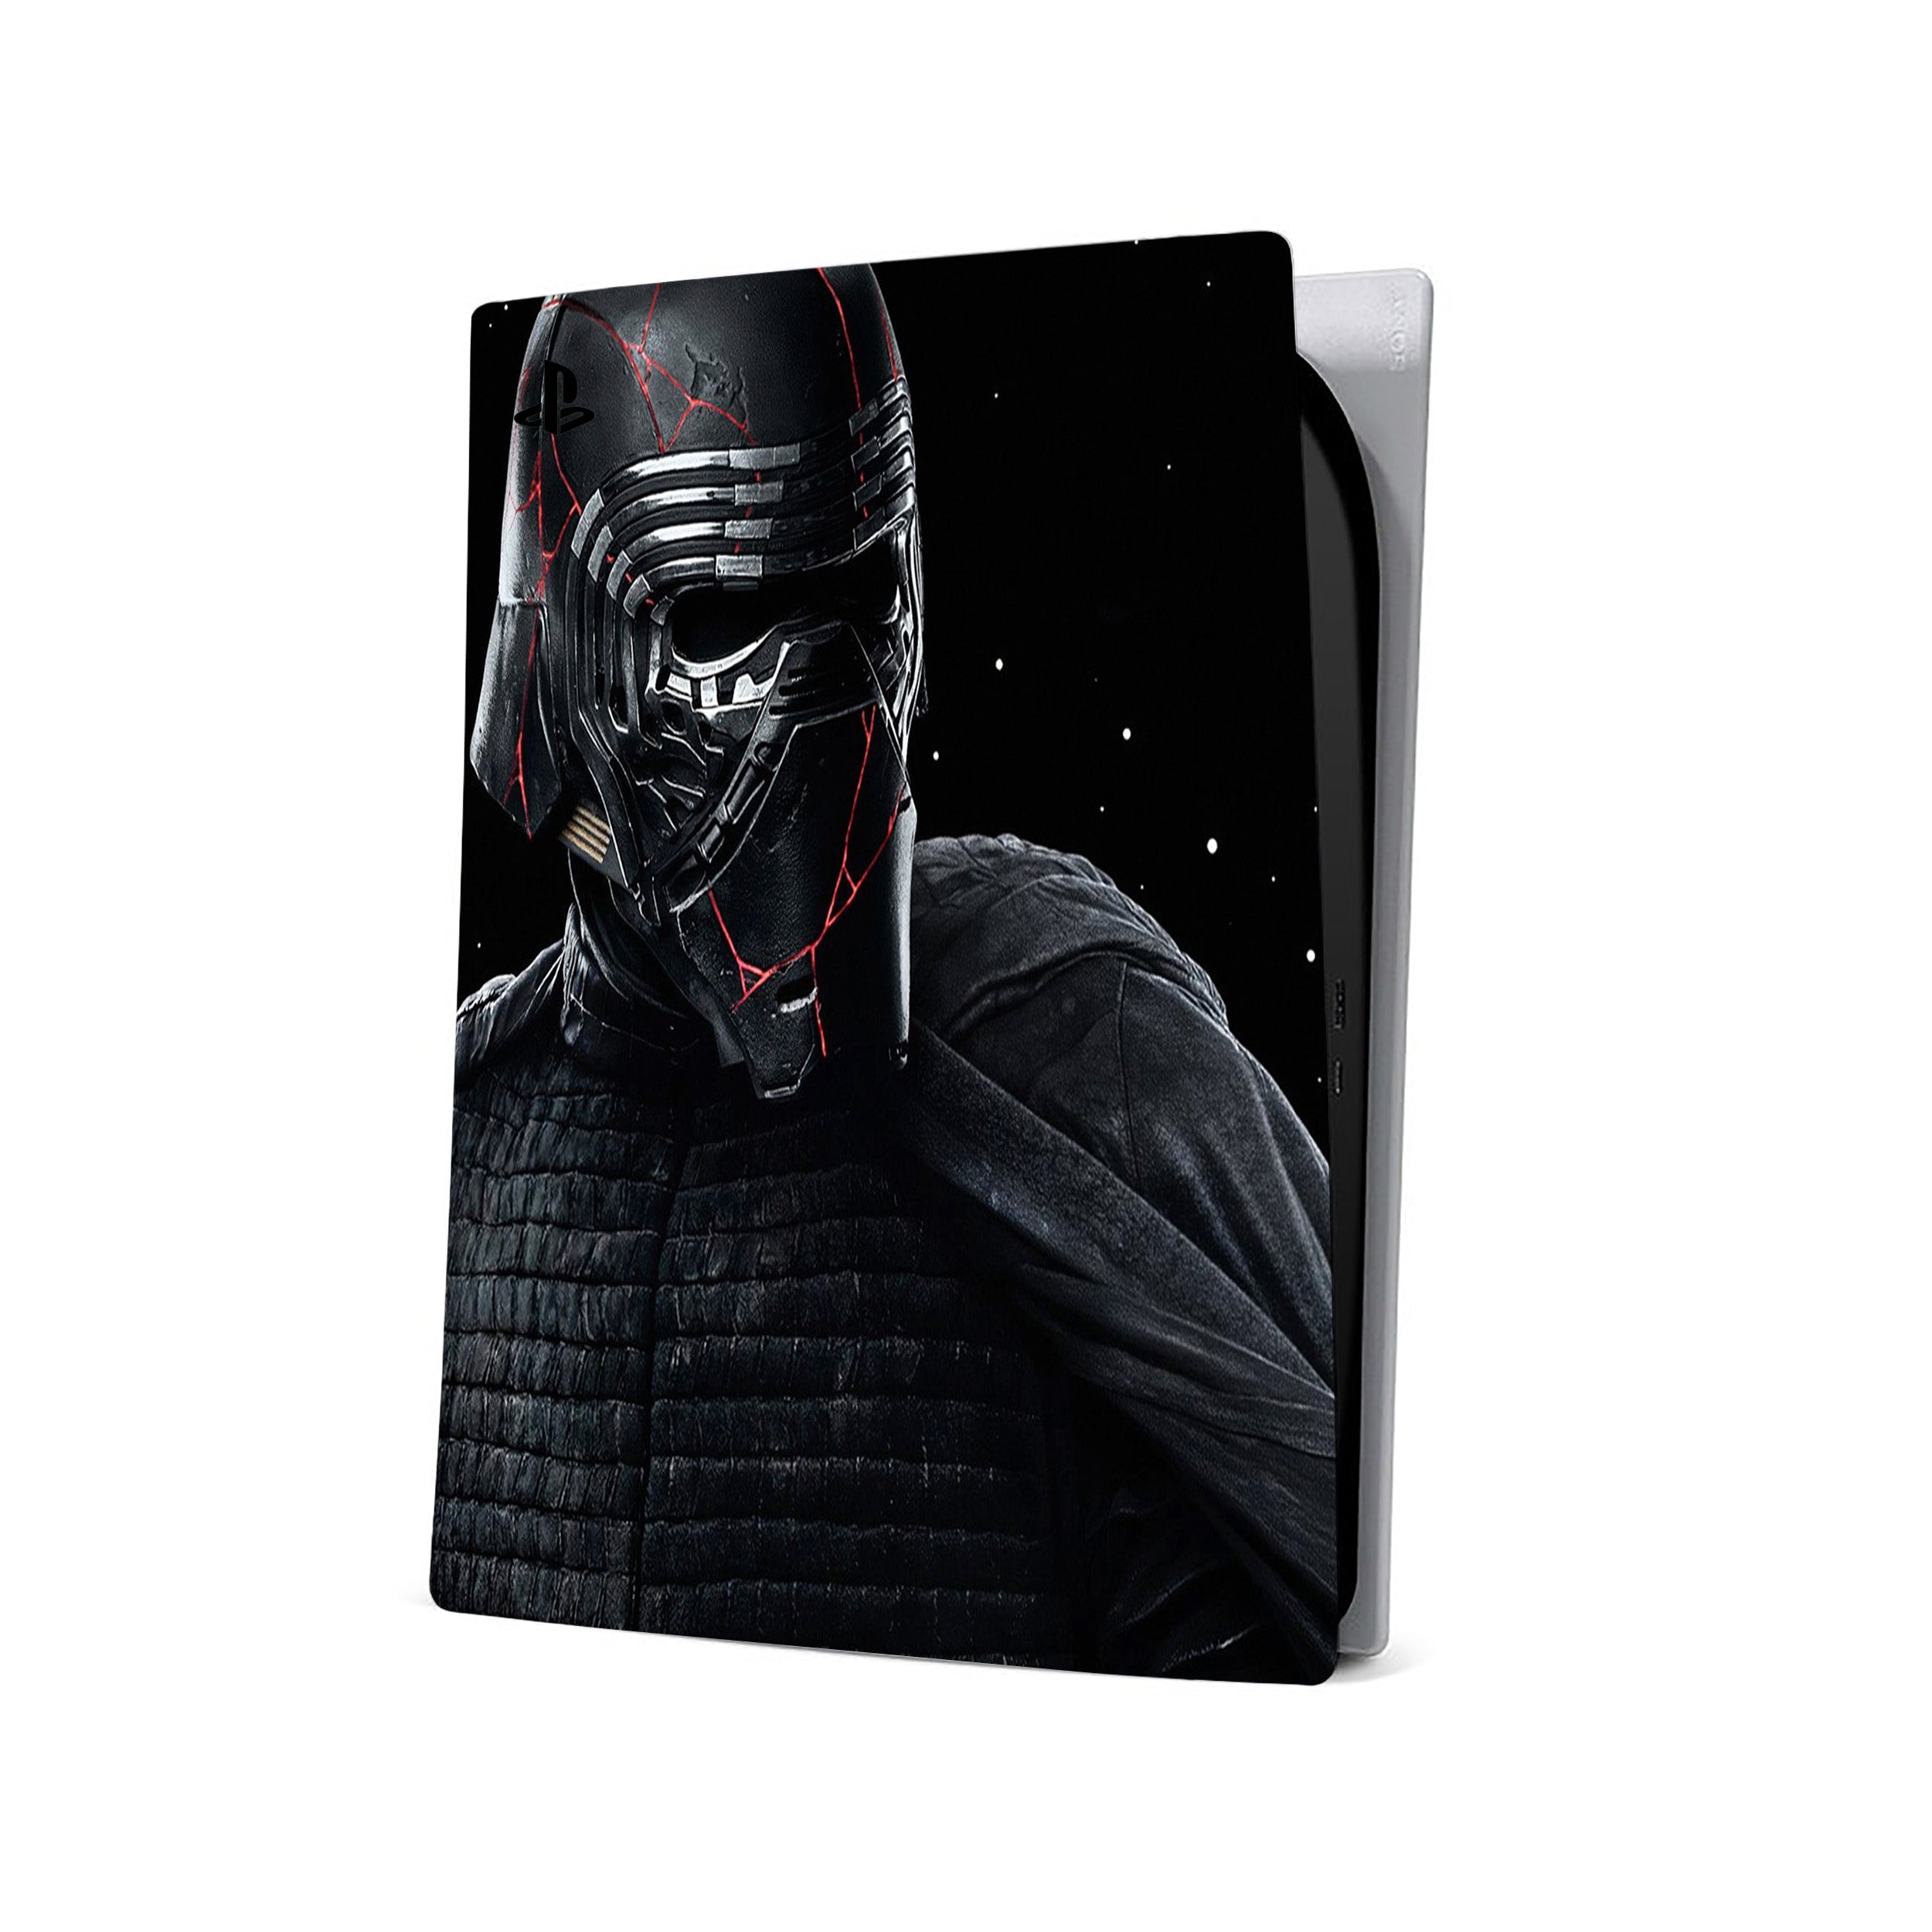 A video game skin featuring a Star Wars design for the PS5.